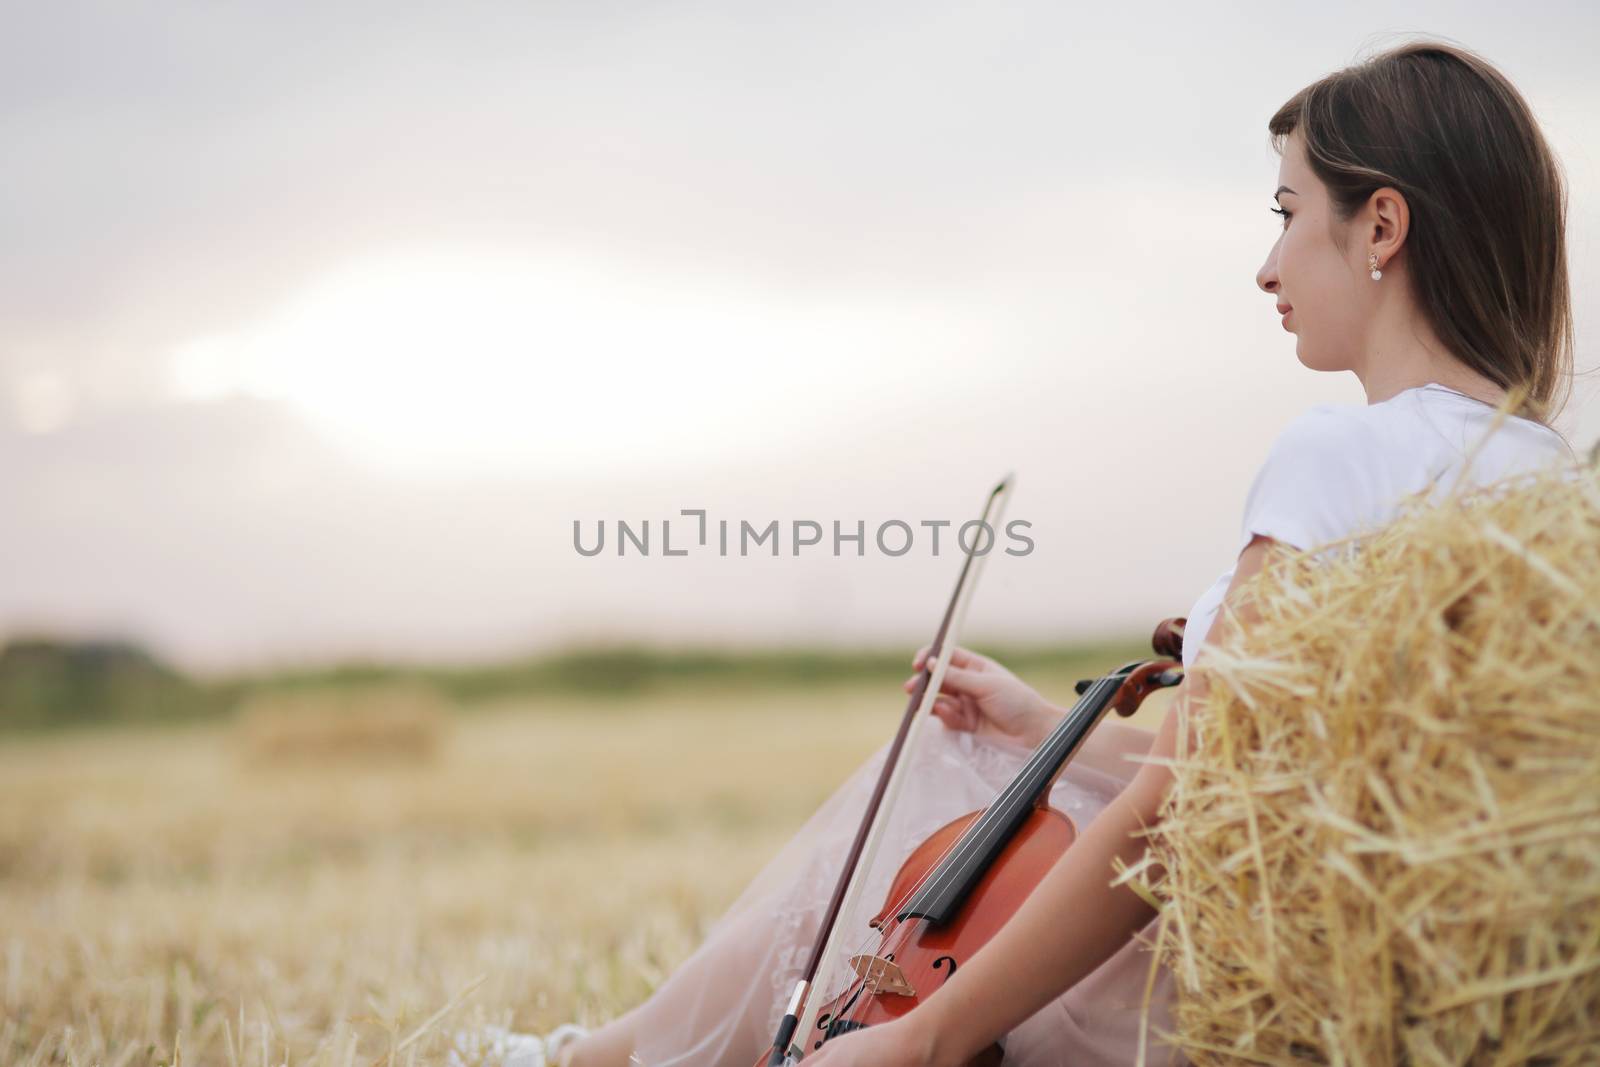 Romantic young woman with flowing hair holding a violin in her hand in a field by selinsmo